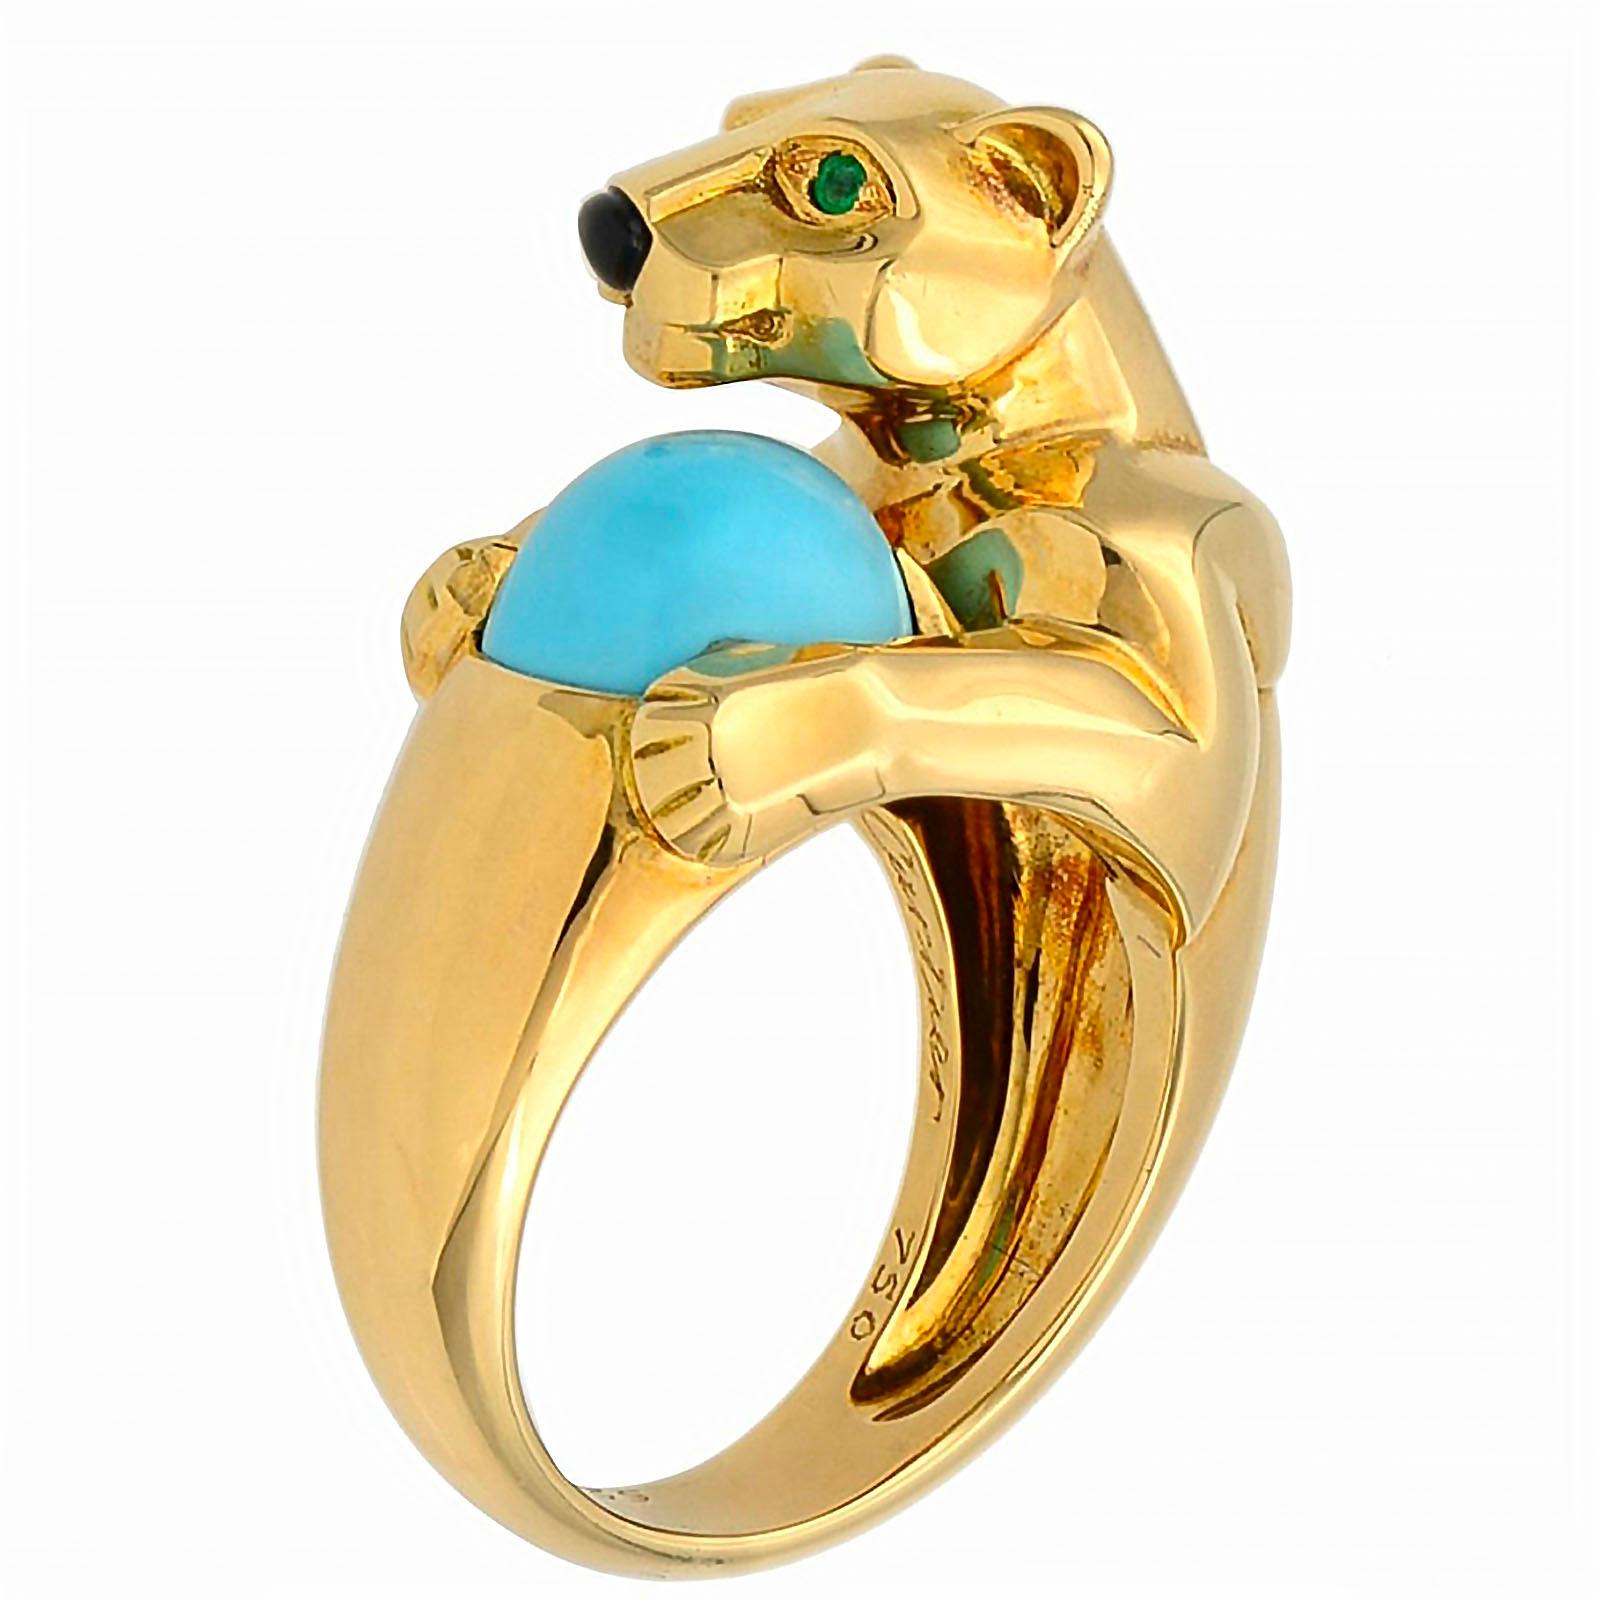 Cartier Panthere Collection Turquoise with Solid 18K Yellow Gold Ring with Emerald & Onyx Accents ring. This piece is from the Cartier brand's iconic and instantly recognizable Panthere collection. This particular design is rare and incredibly hard